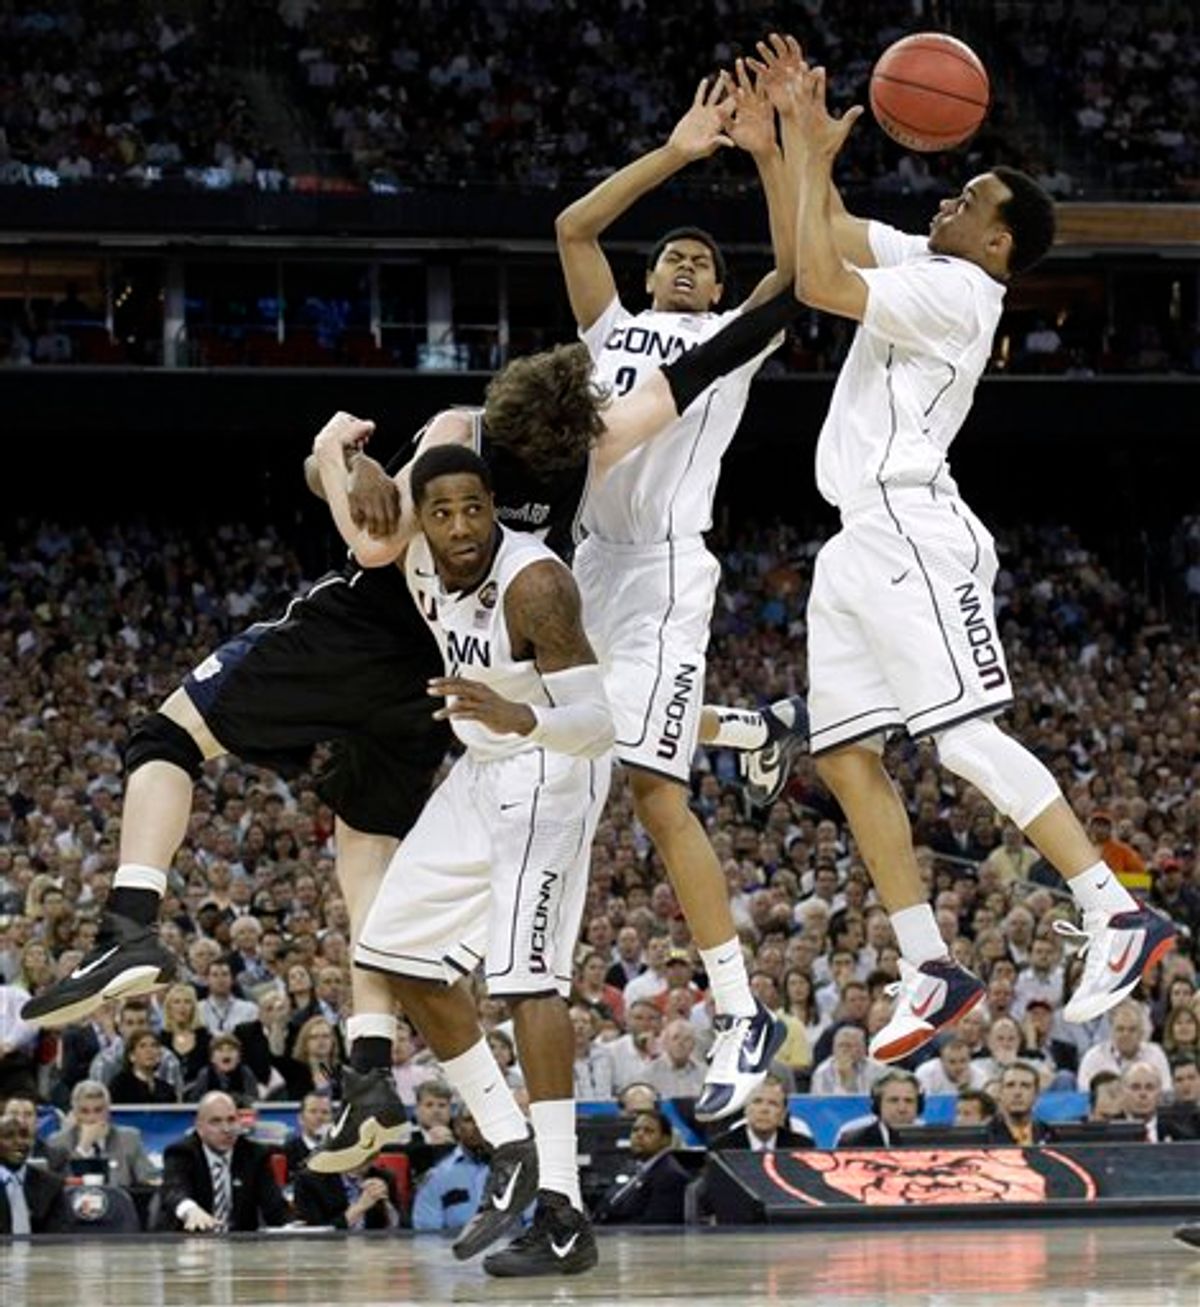 Butler's Matt Howard, left, fights for a rebound with Connecticut's Alex Oriakhi, Jeremy Lamb (3) and Shabazz Napier, right, during the second half of the men's NCAA Final Four college basketball championship game Monday, April 4, 2011, in Houston. (AP Photo/David J. Phillip) (AP)